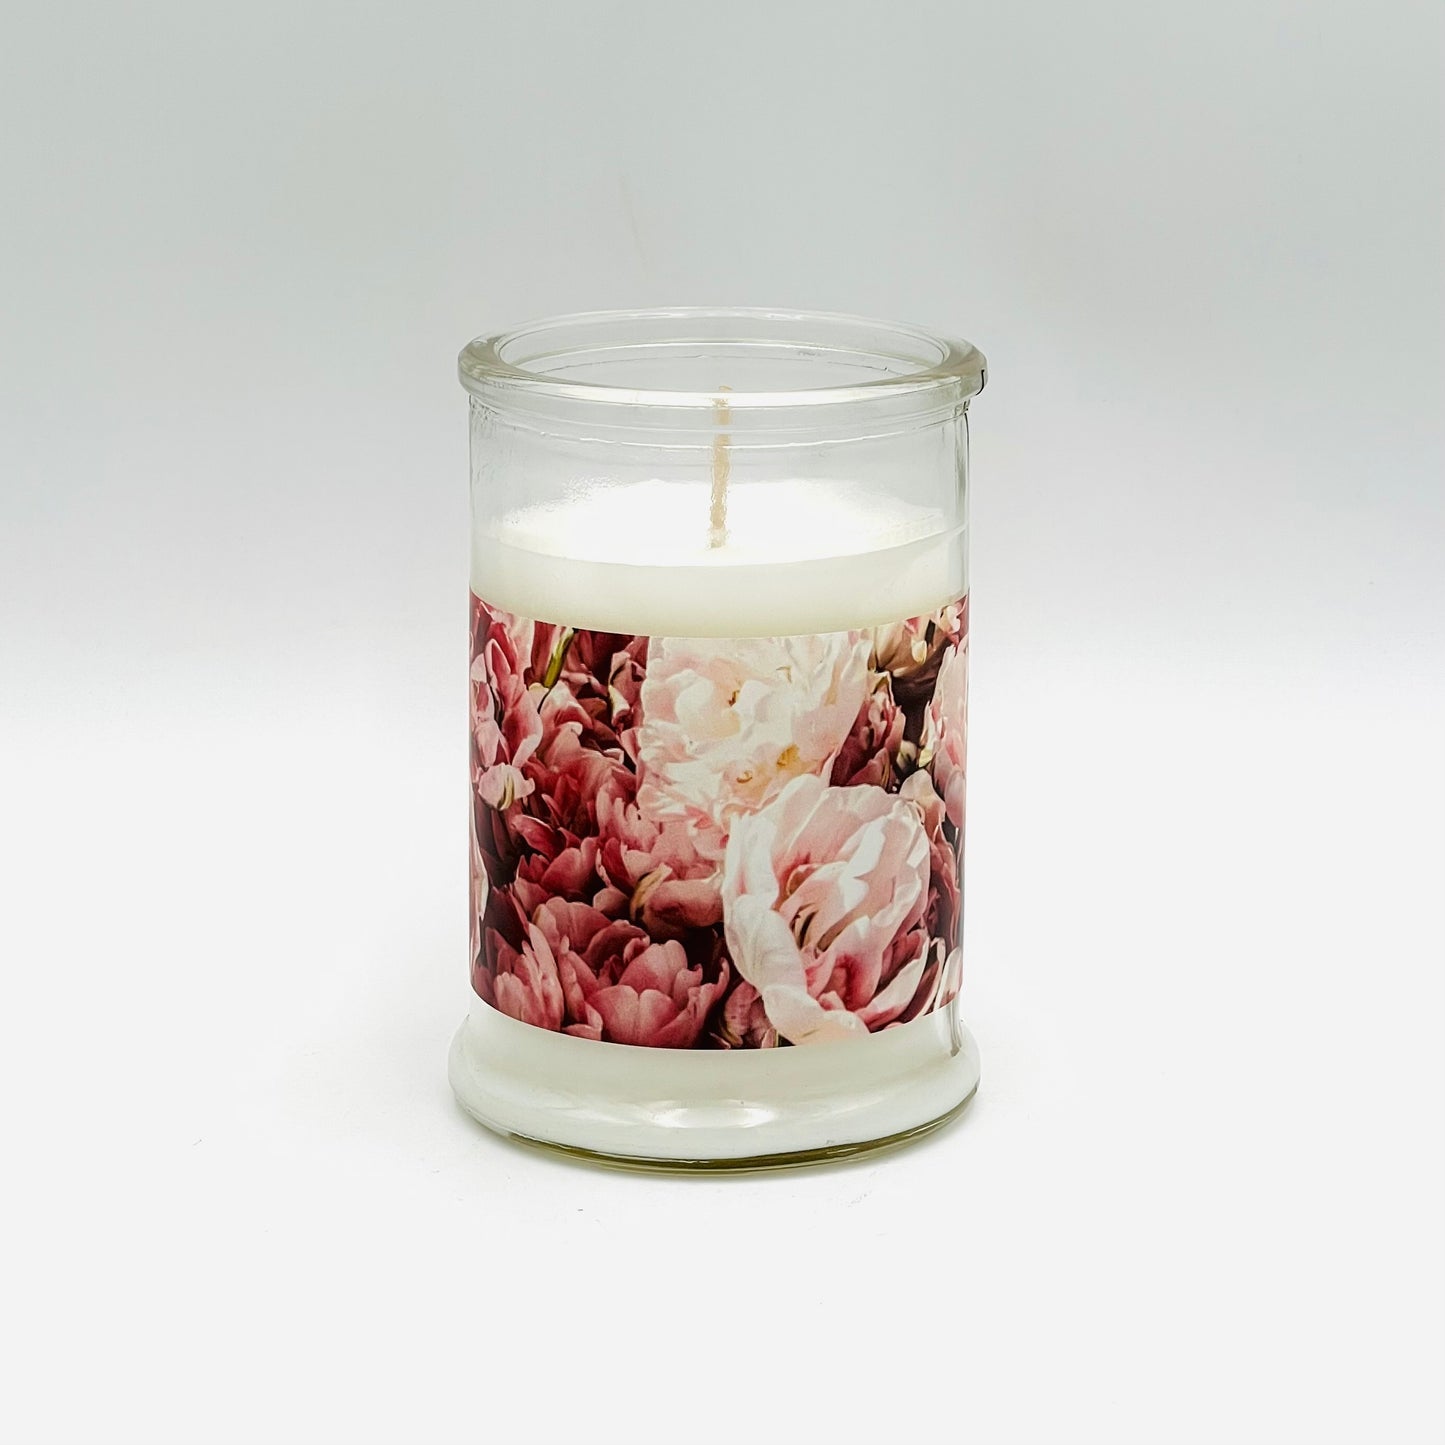 Scented candle "Peonies" with a light peony aroma